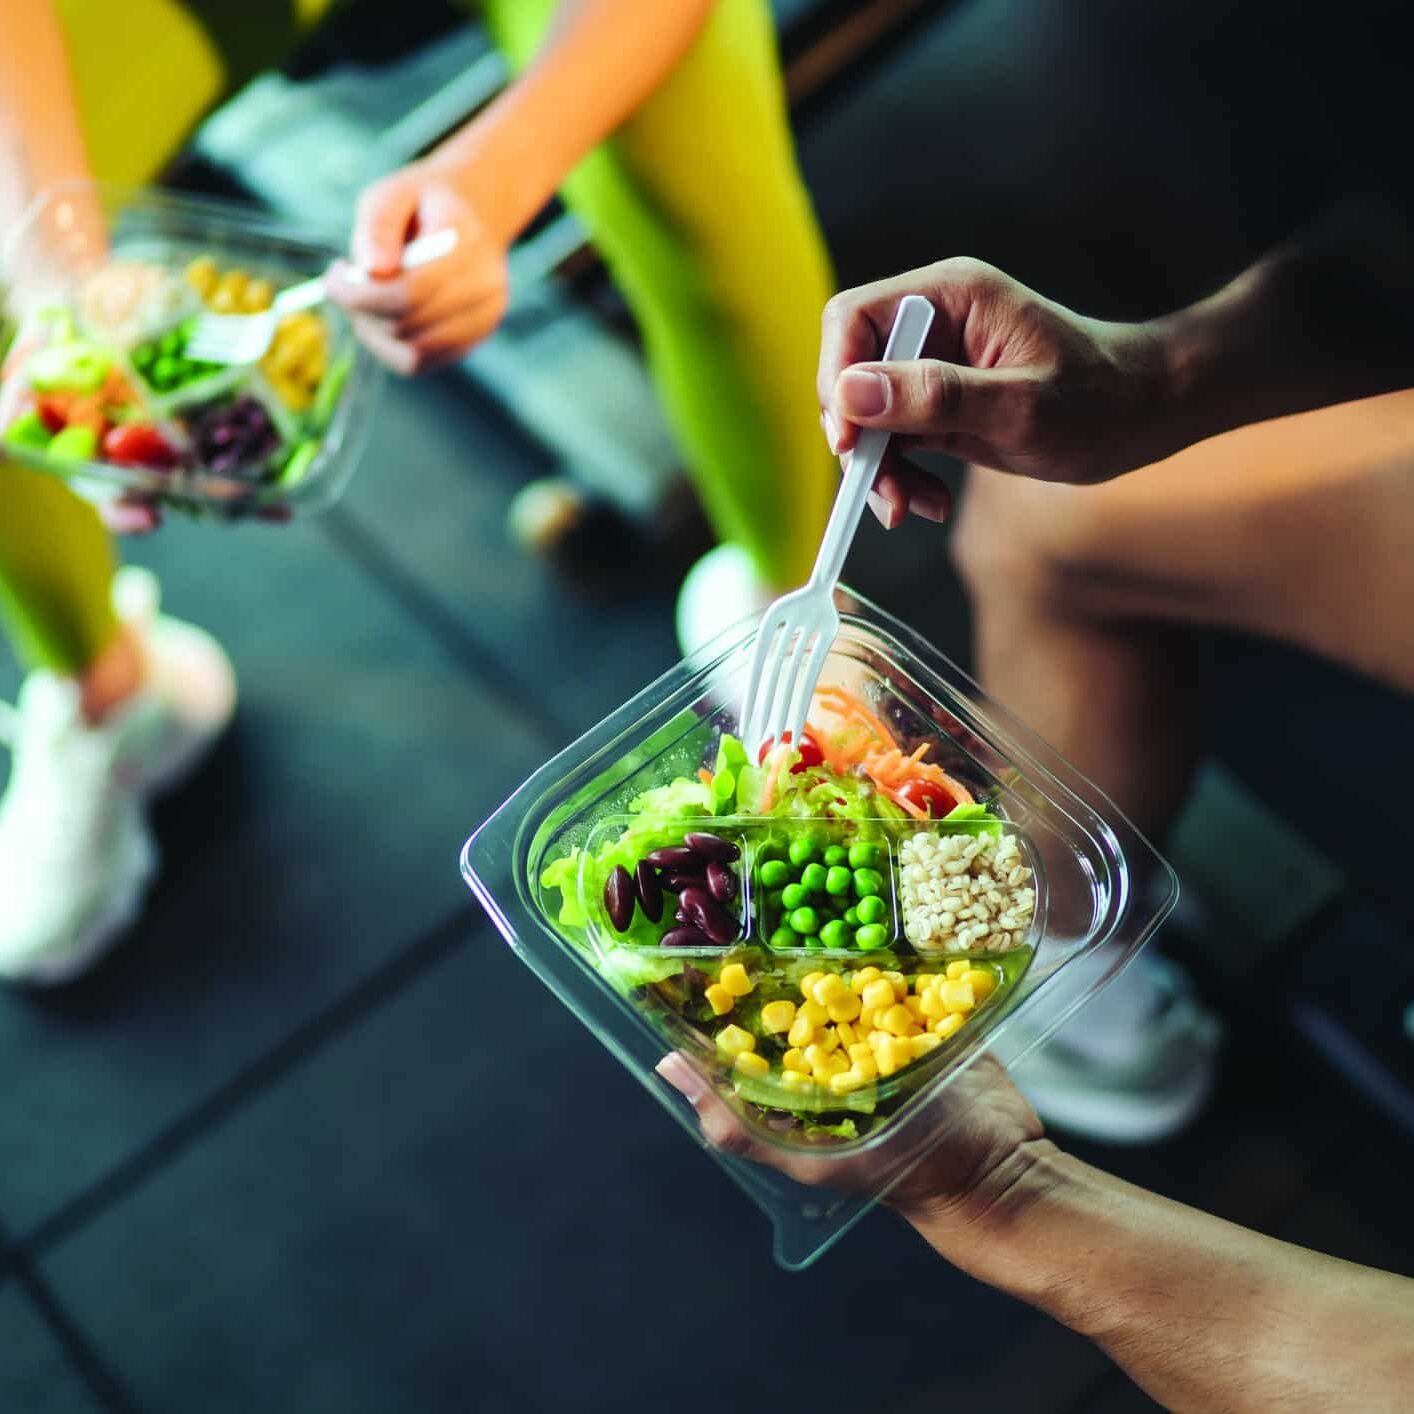 Top view Asian man and woman healthy eating salad after exercise at fitness gym. Two athlete eating salad for health together. Selective focus on salad bowl on hand.